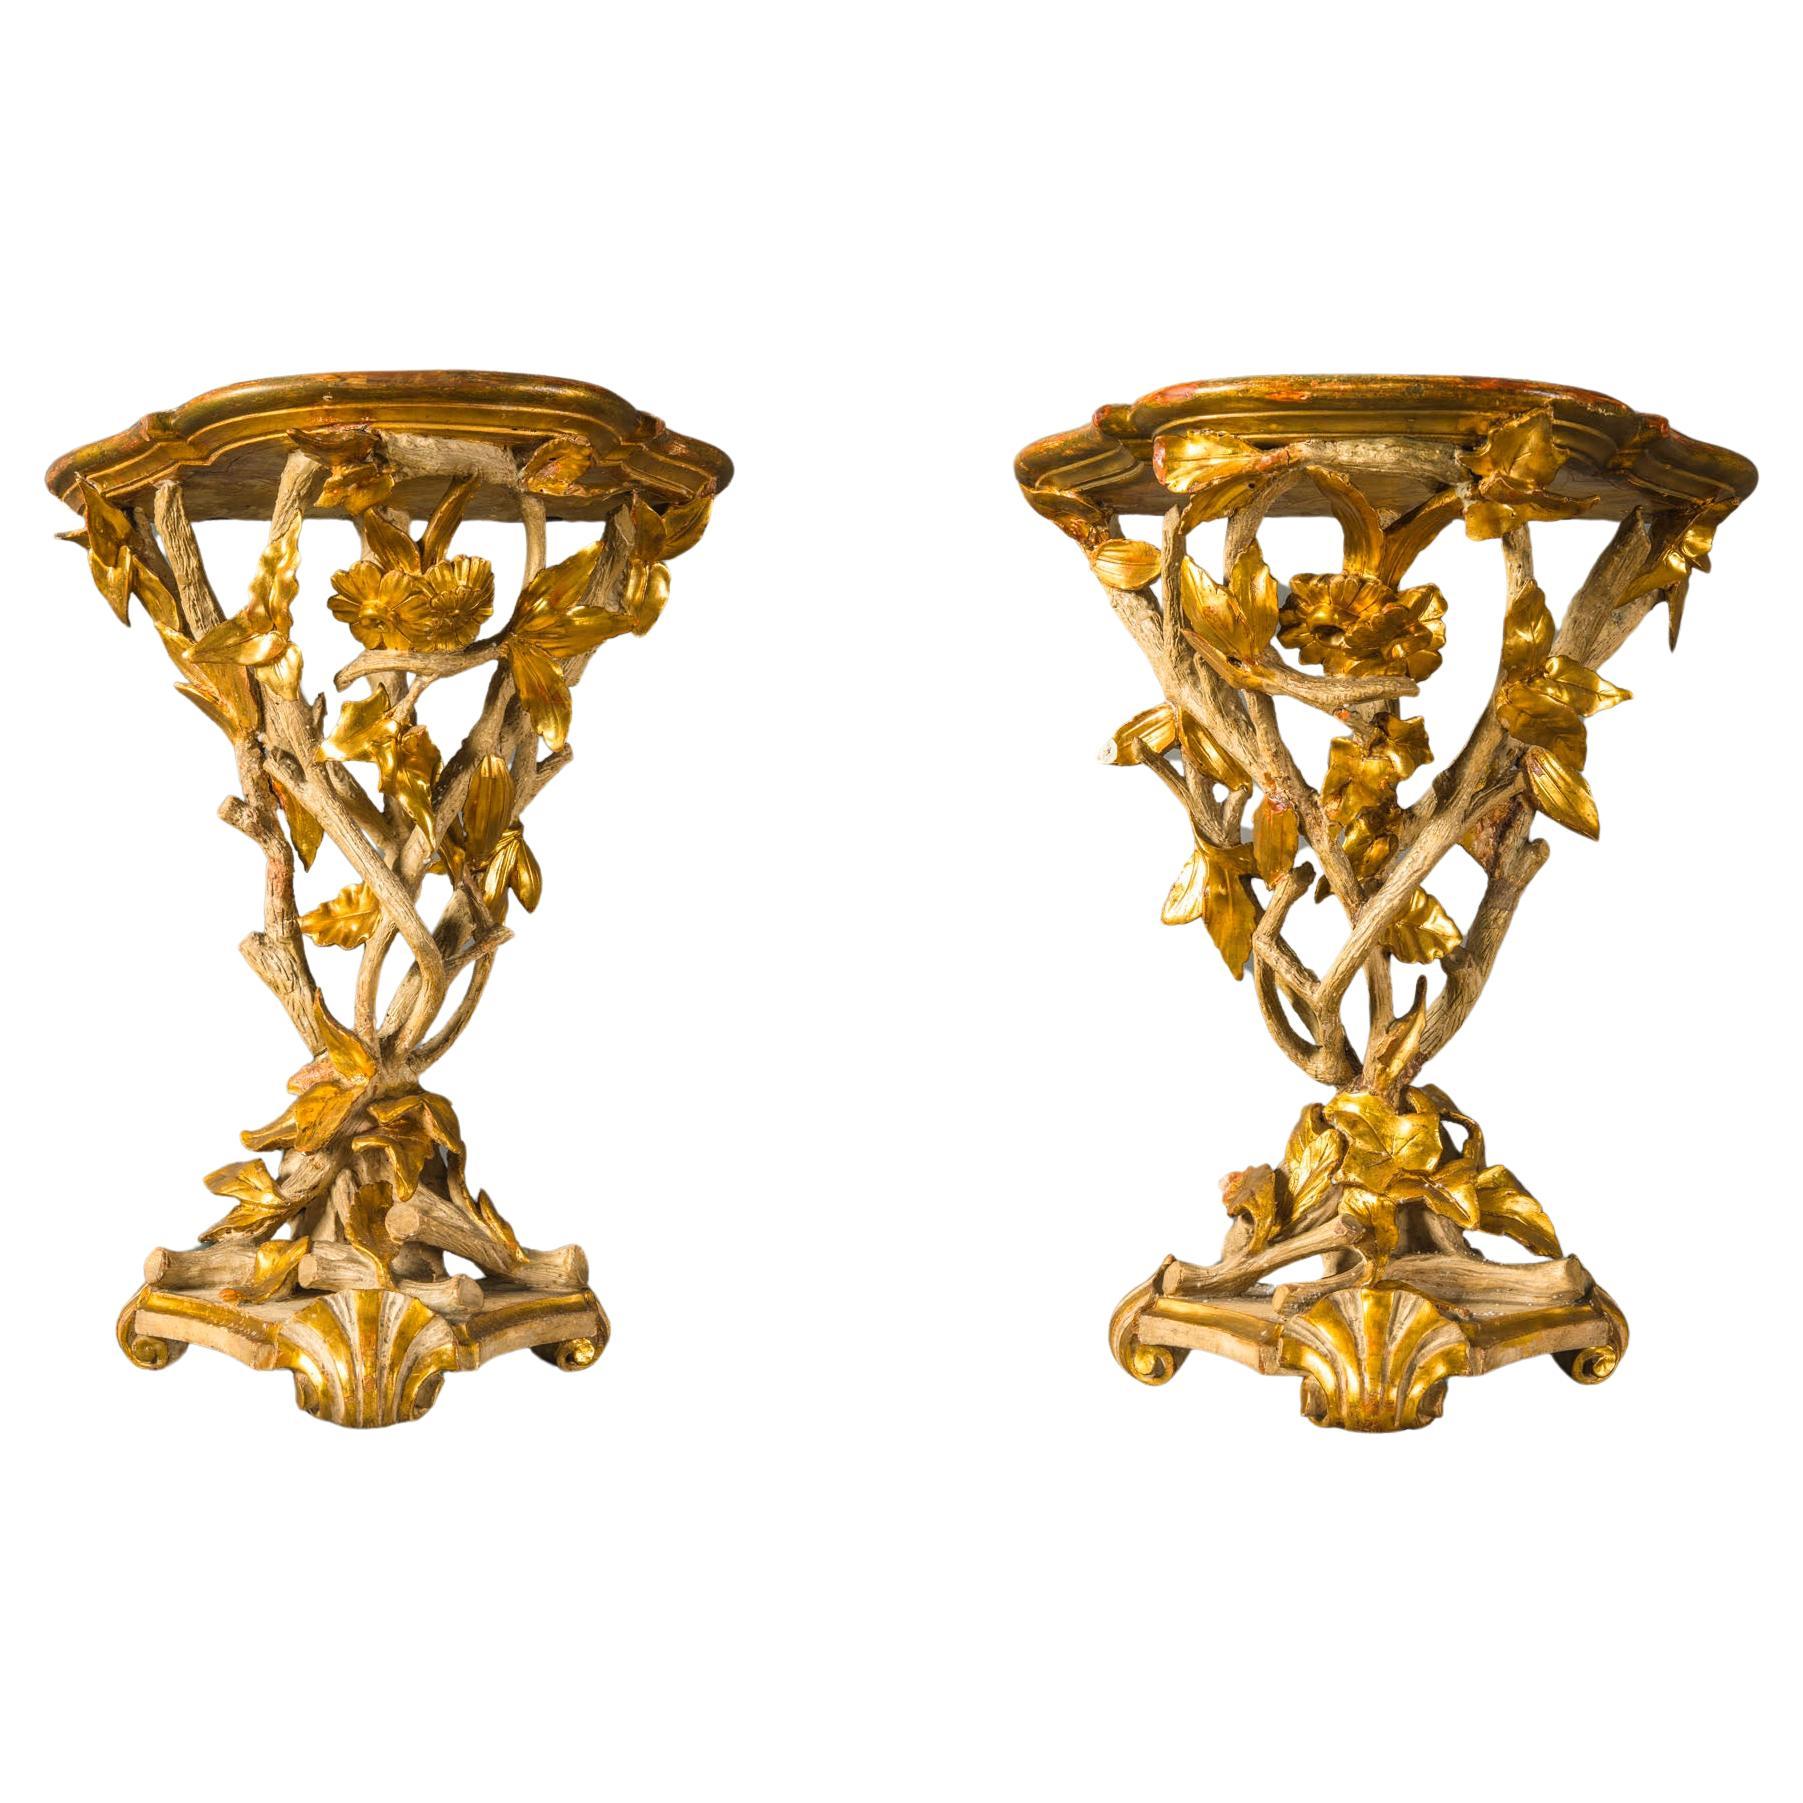 Rococo Gilded and Lacquered Italian Pair of Gueridon